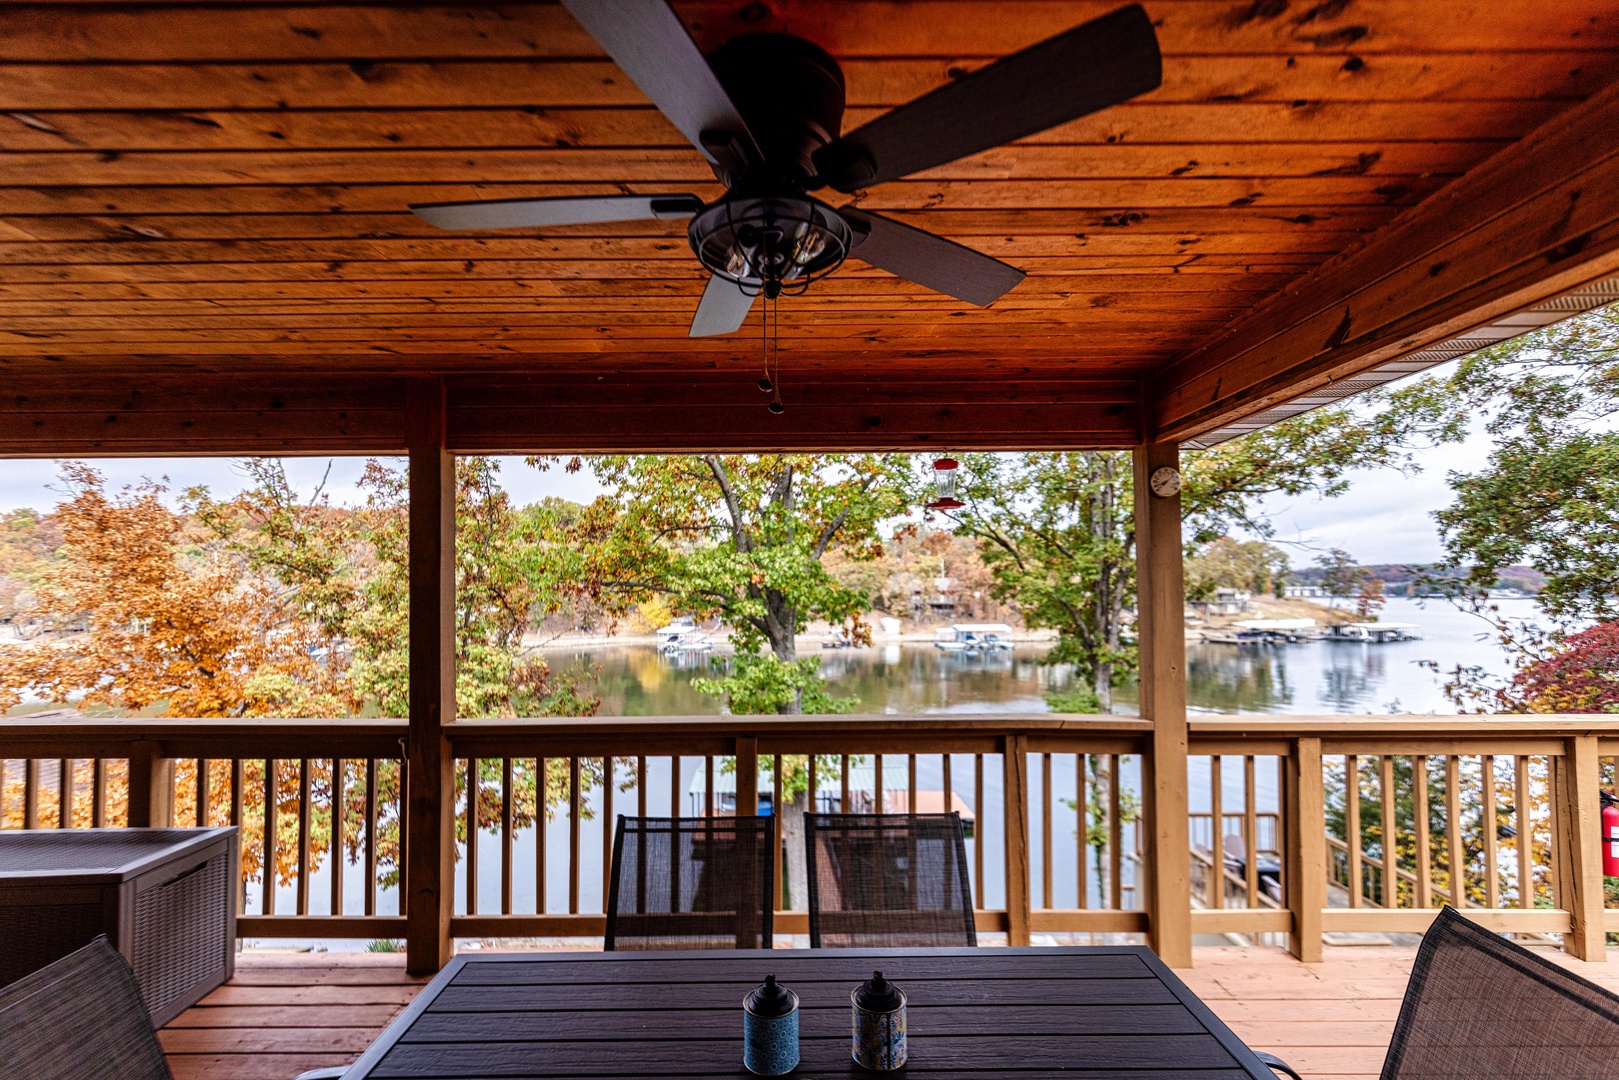 Enjoy the view while you dine al fresco on the back deck, with seating for 6